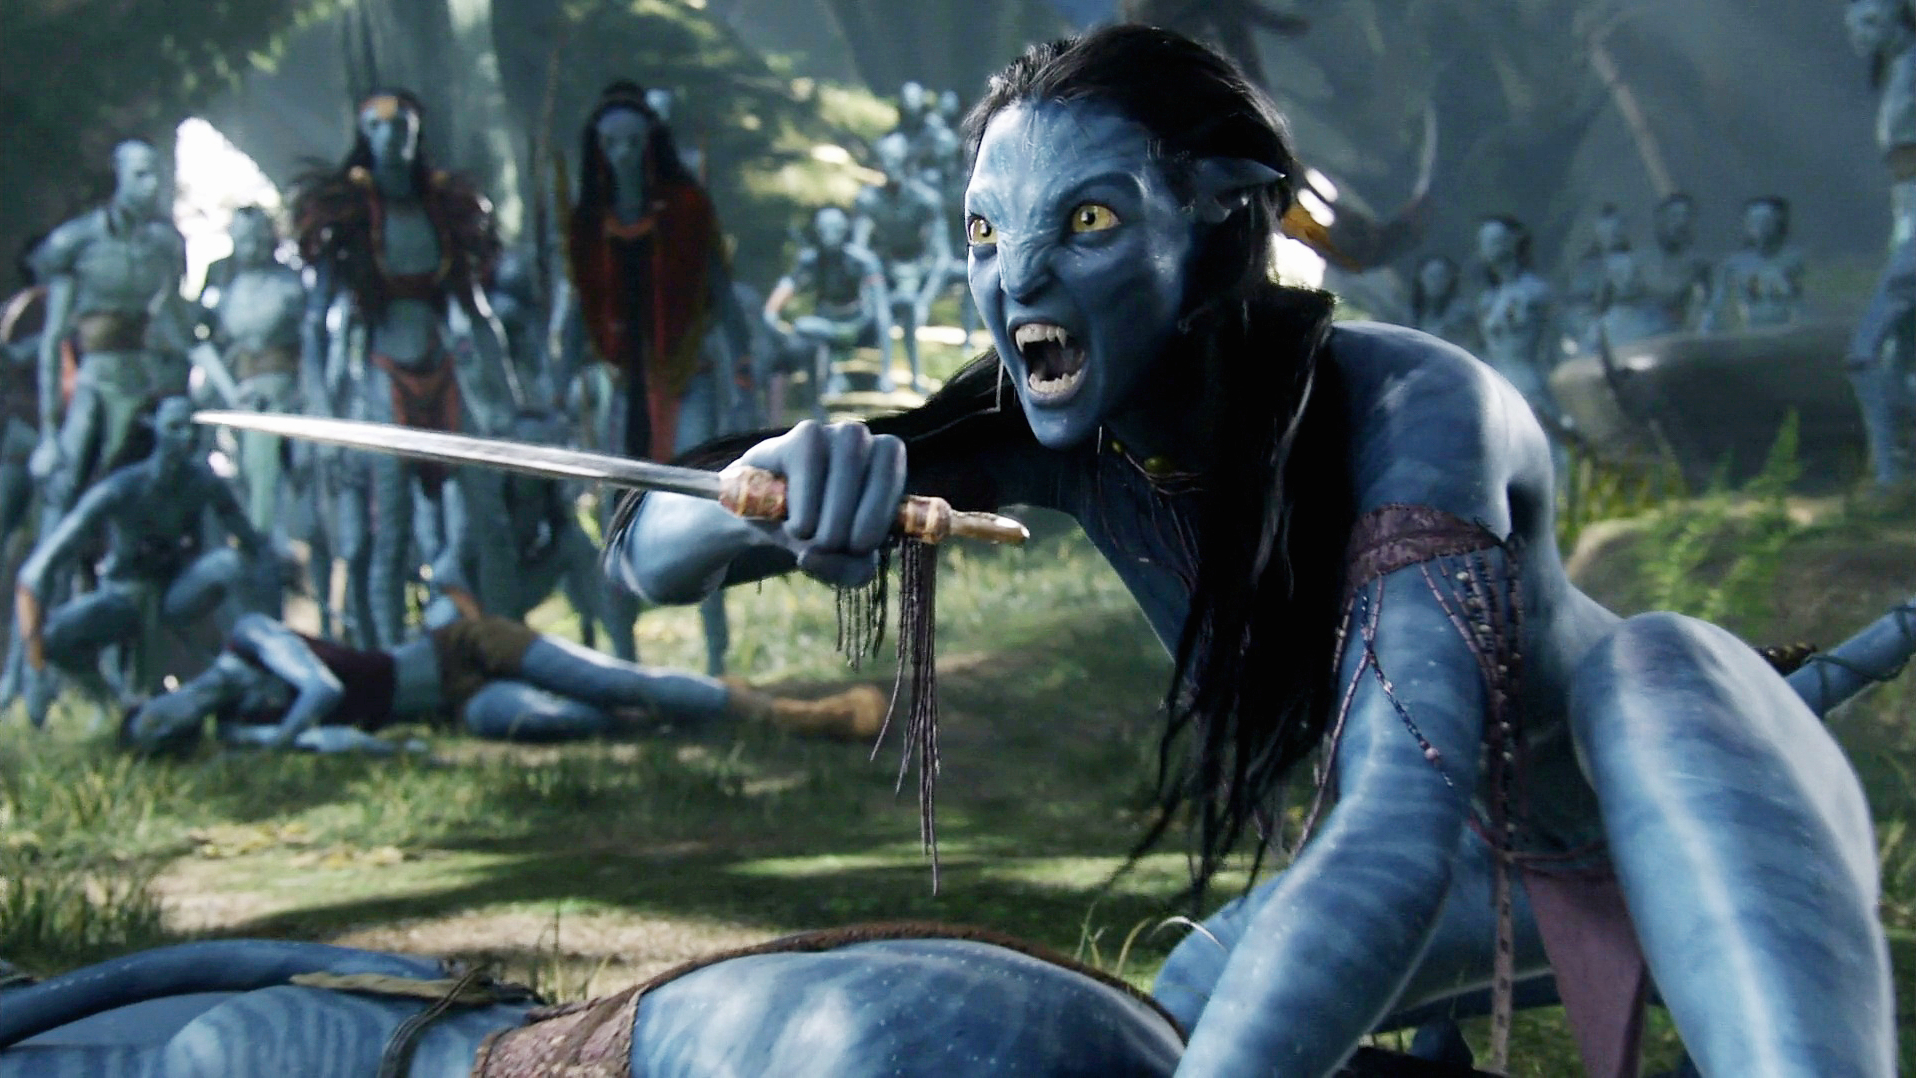 Latest Sci-Fi News: ‘Avatar 2’ will be even longer than we thought possible as a ‘Star Wars’ legend gets uncancelled